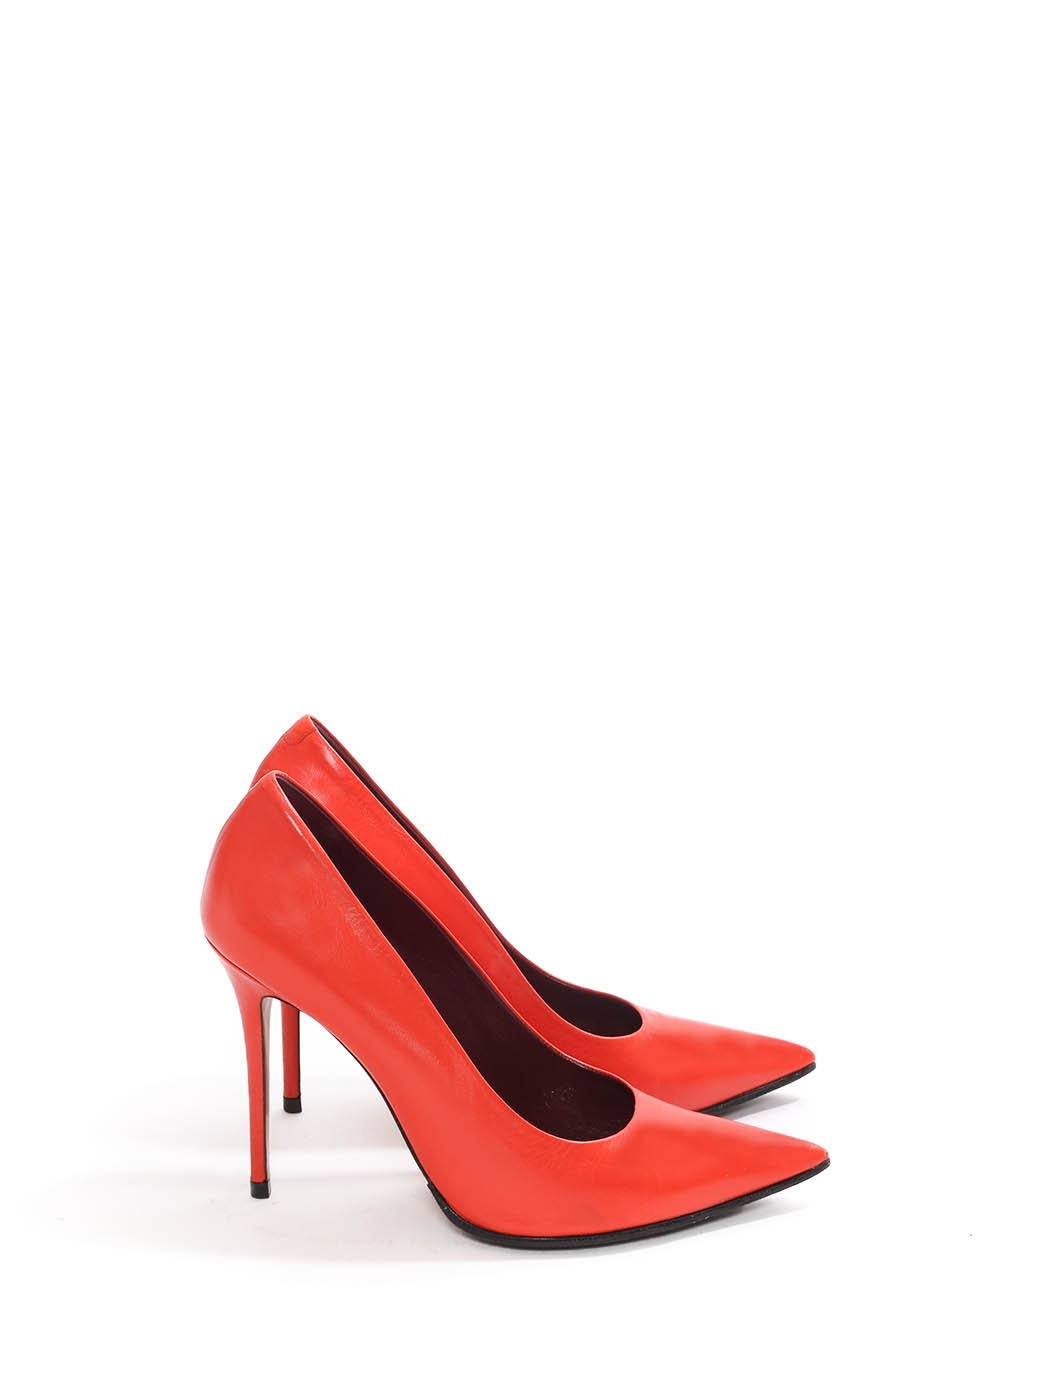 CELINE heel pointed toe bright red red leather pumps Retail price $600 37